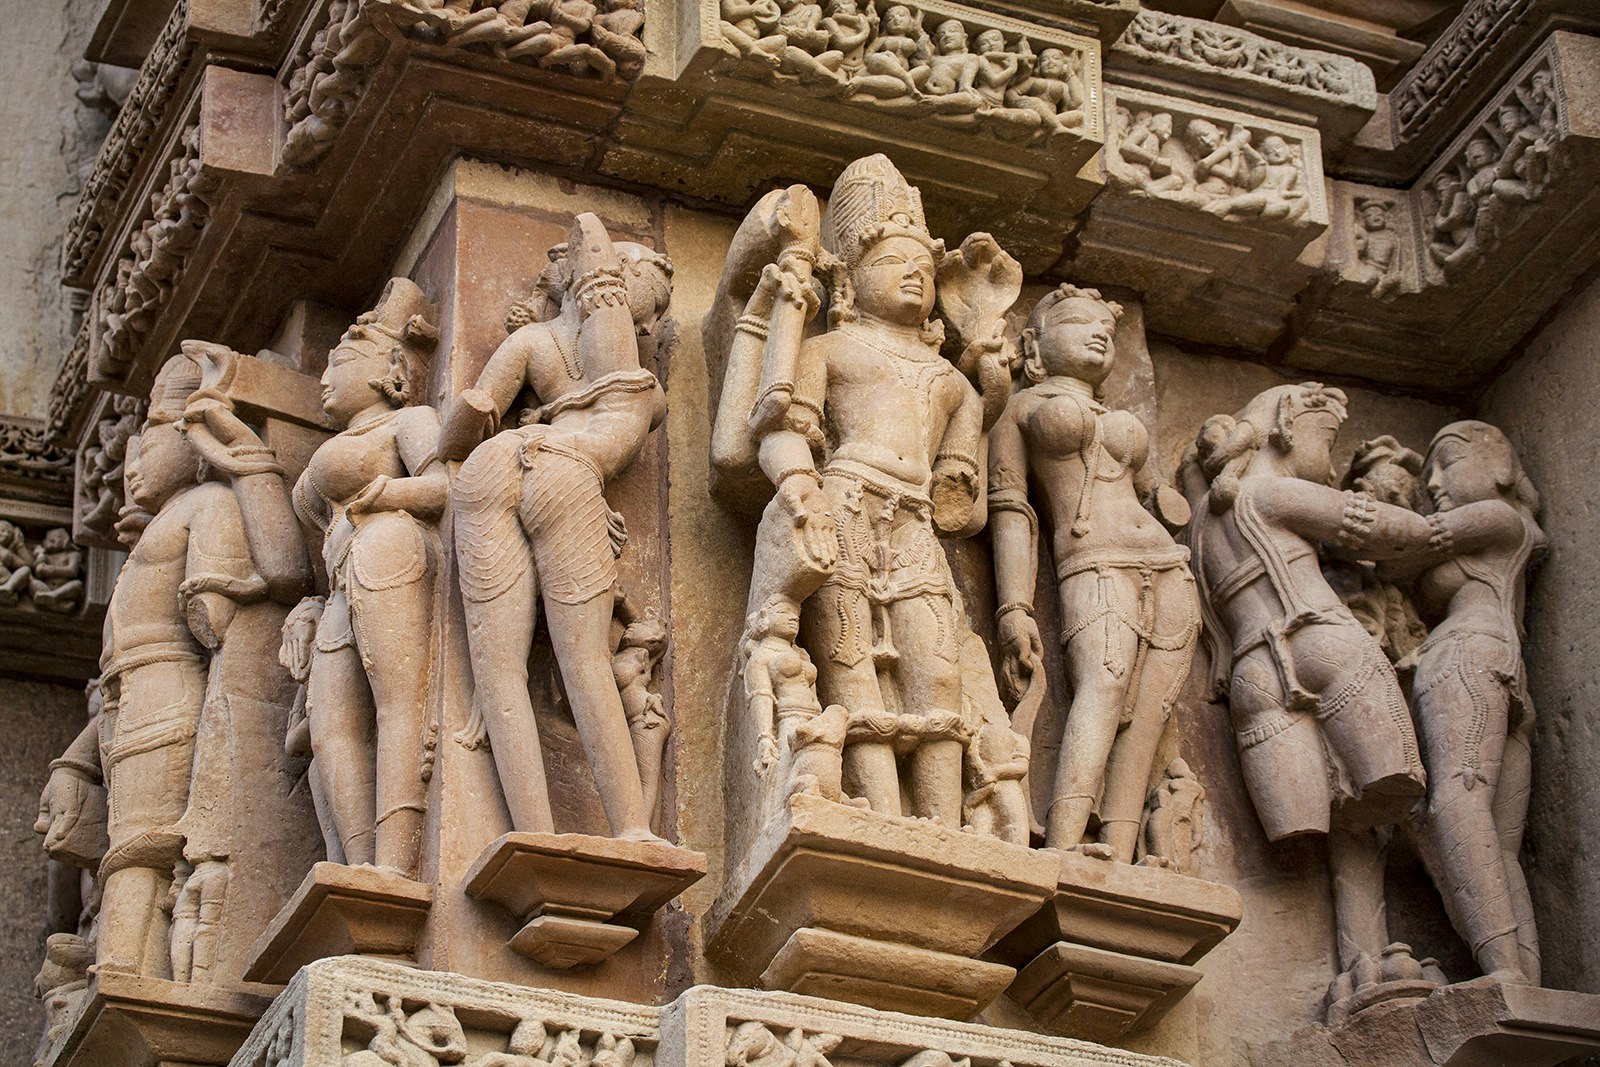 Scantily clad sandstone sculptures cover the walls of the Lakshmana temple. Madhya Pradesh, India.